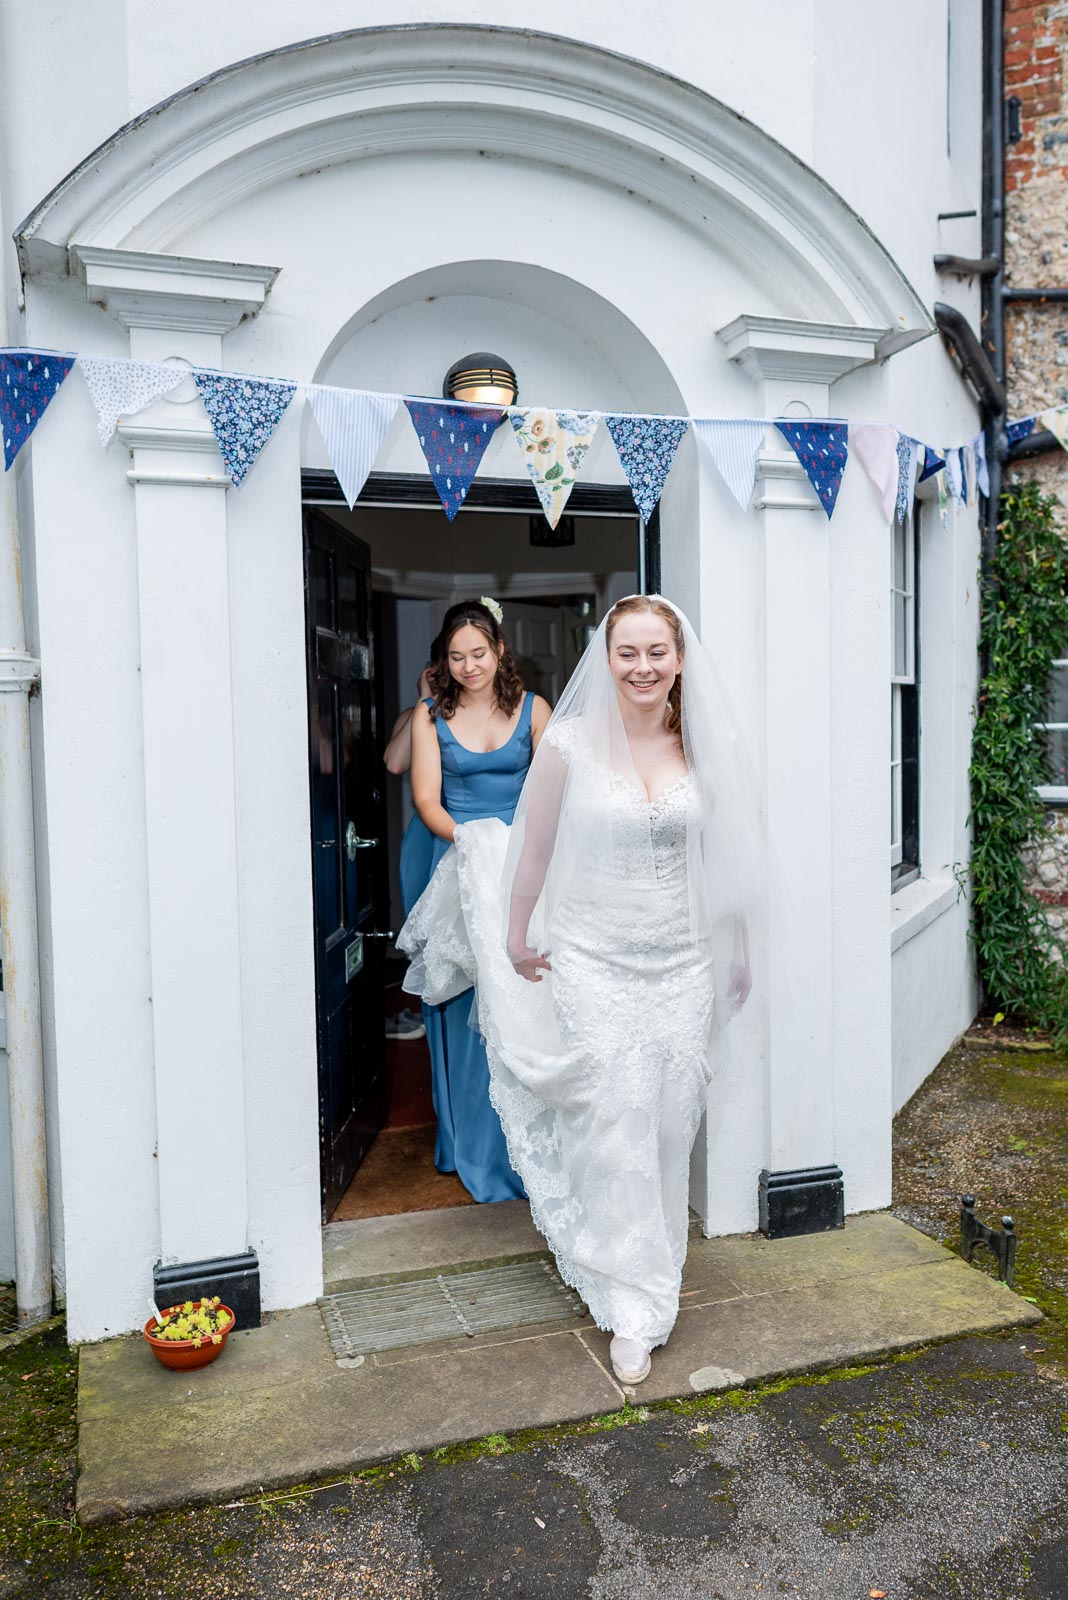 Lily leaves the family home to get married to Callum at St Nicholas Church in Iford.